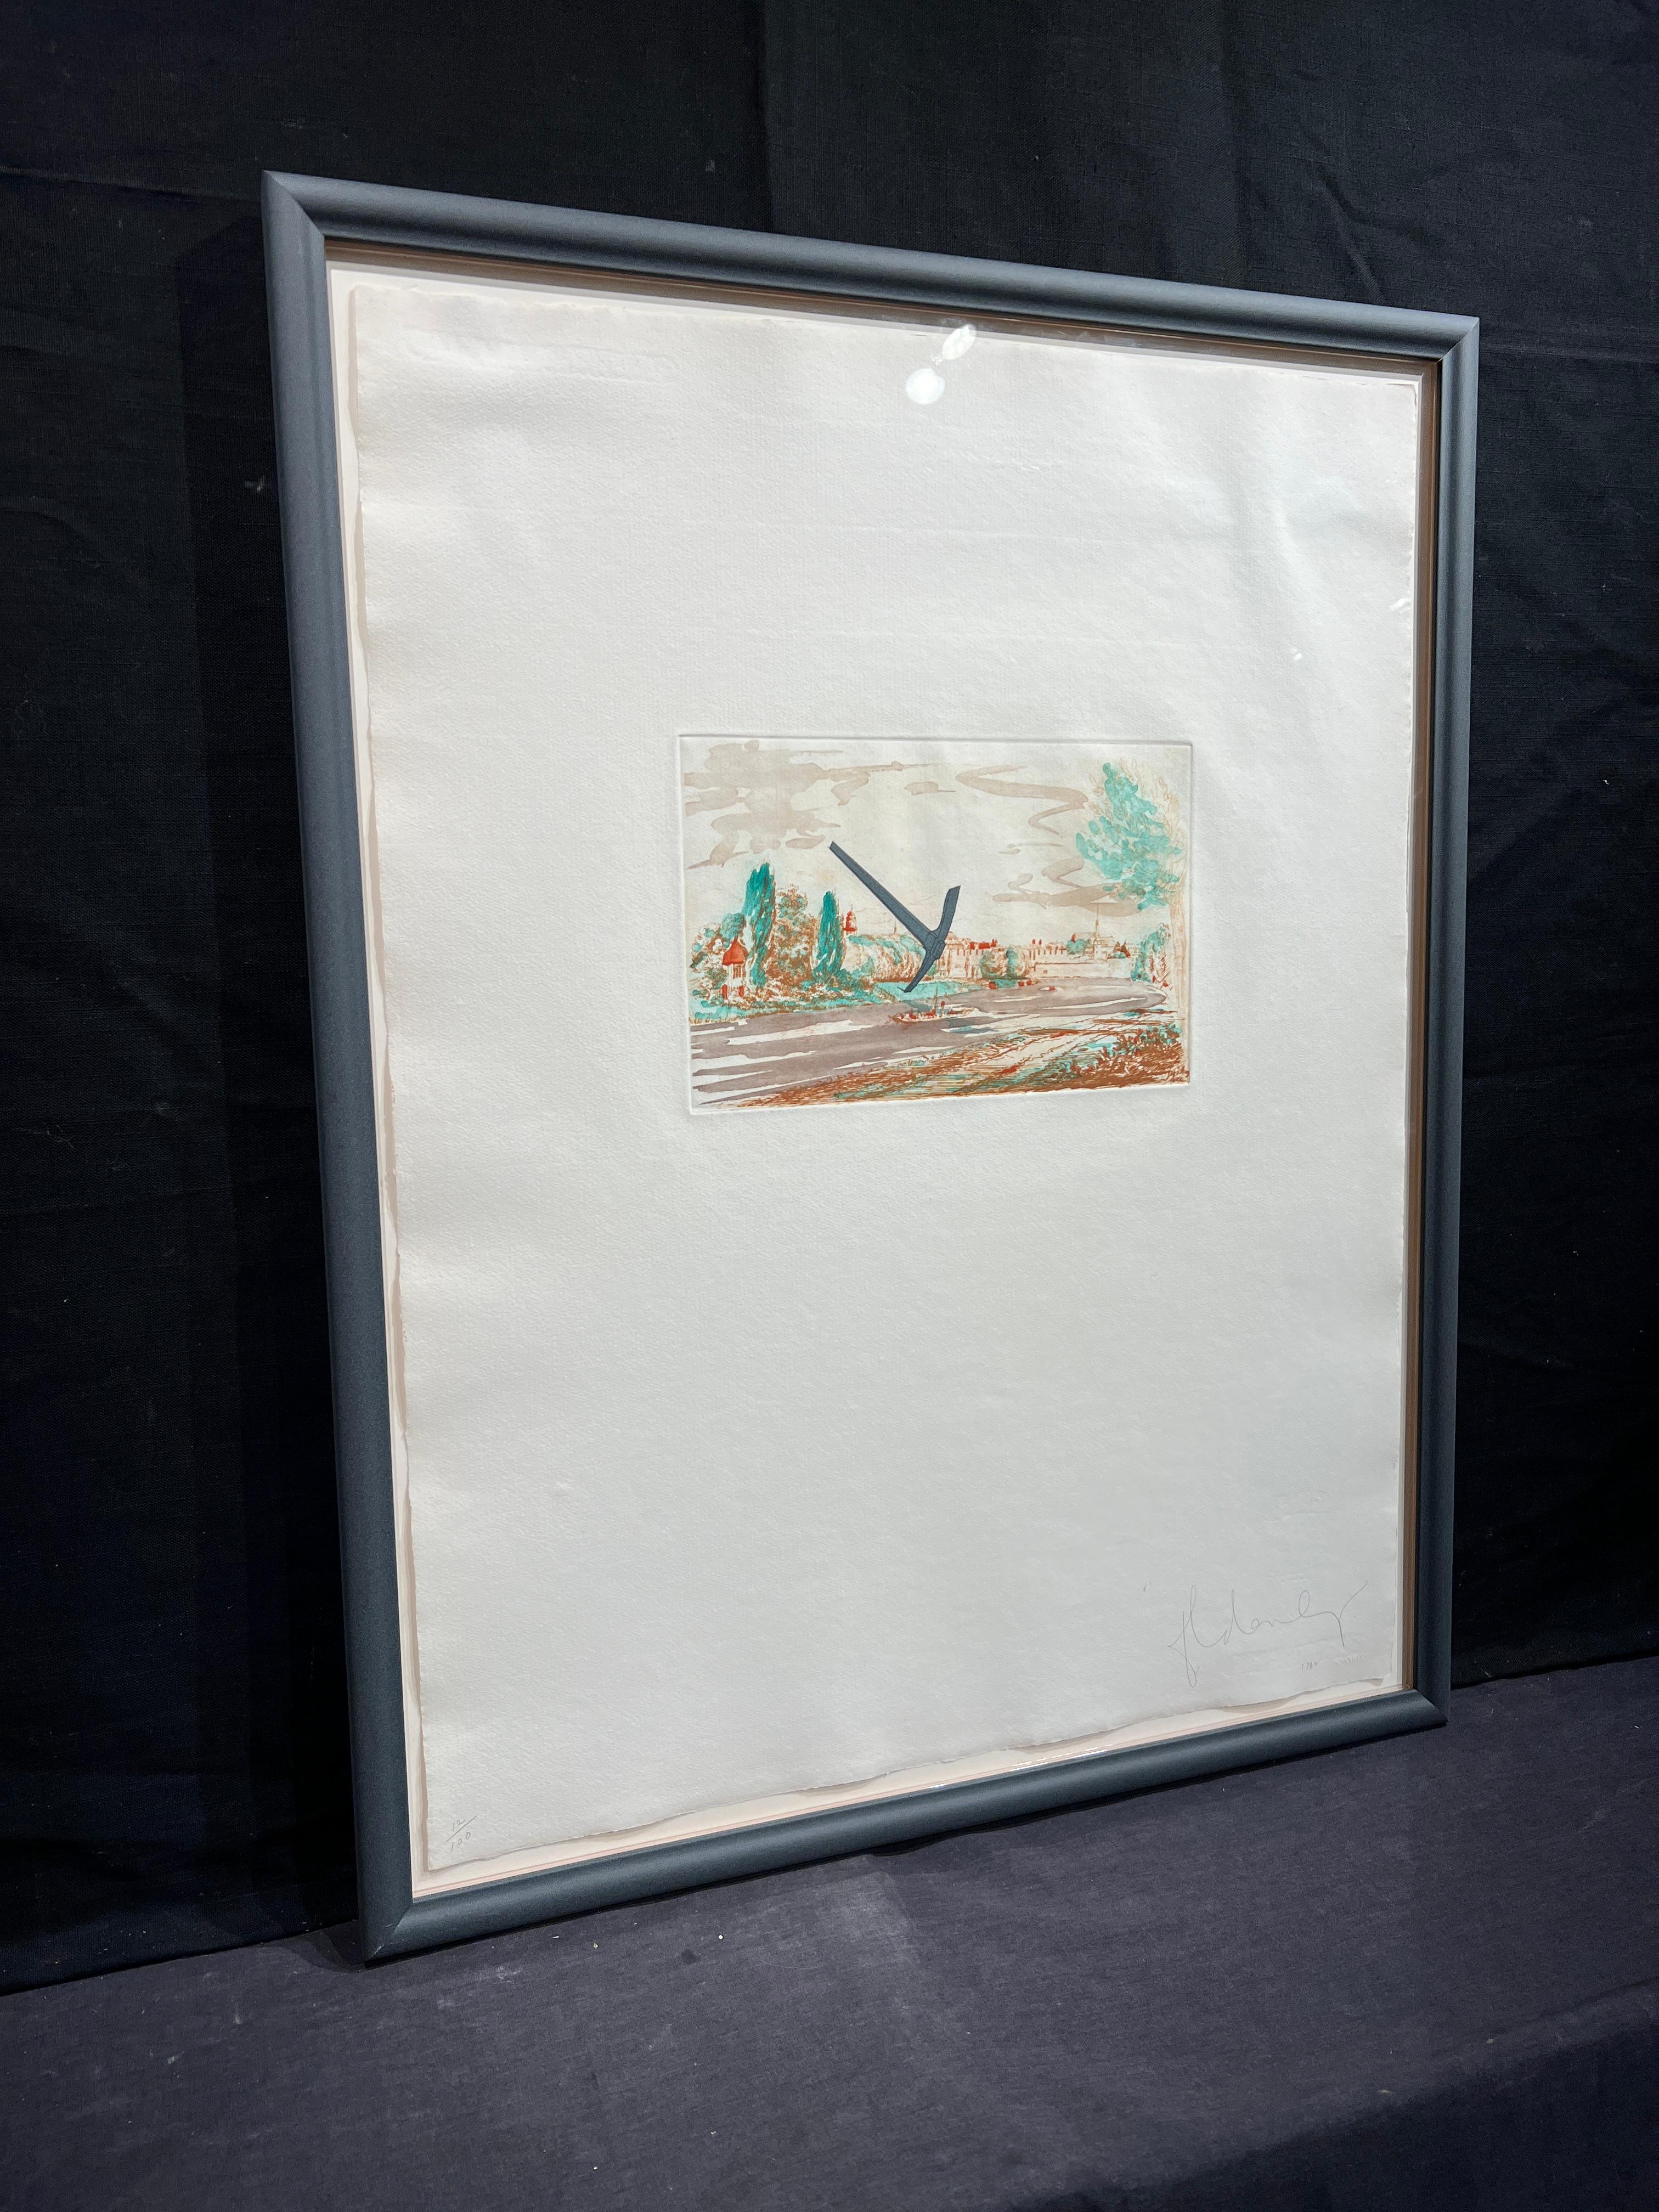 Pickaxe (Spitzhacke) Superimposed on a Drawing of the Site by E.L. Grimm For Sale 2